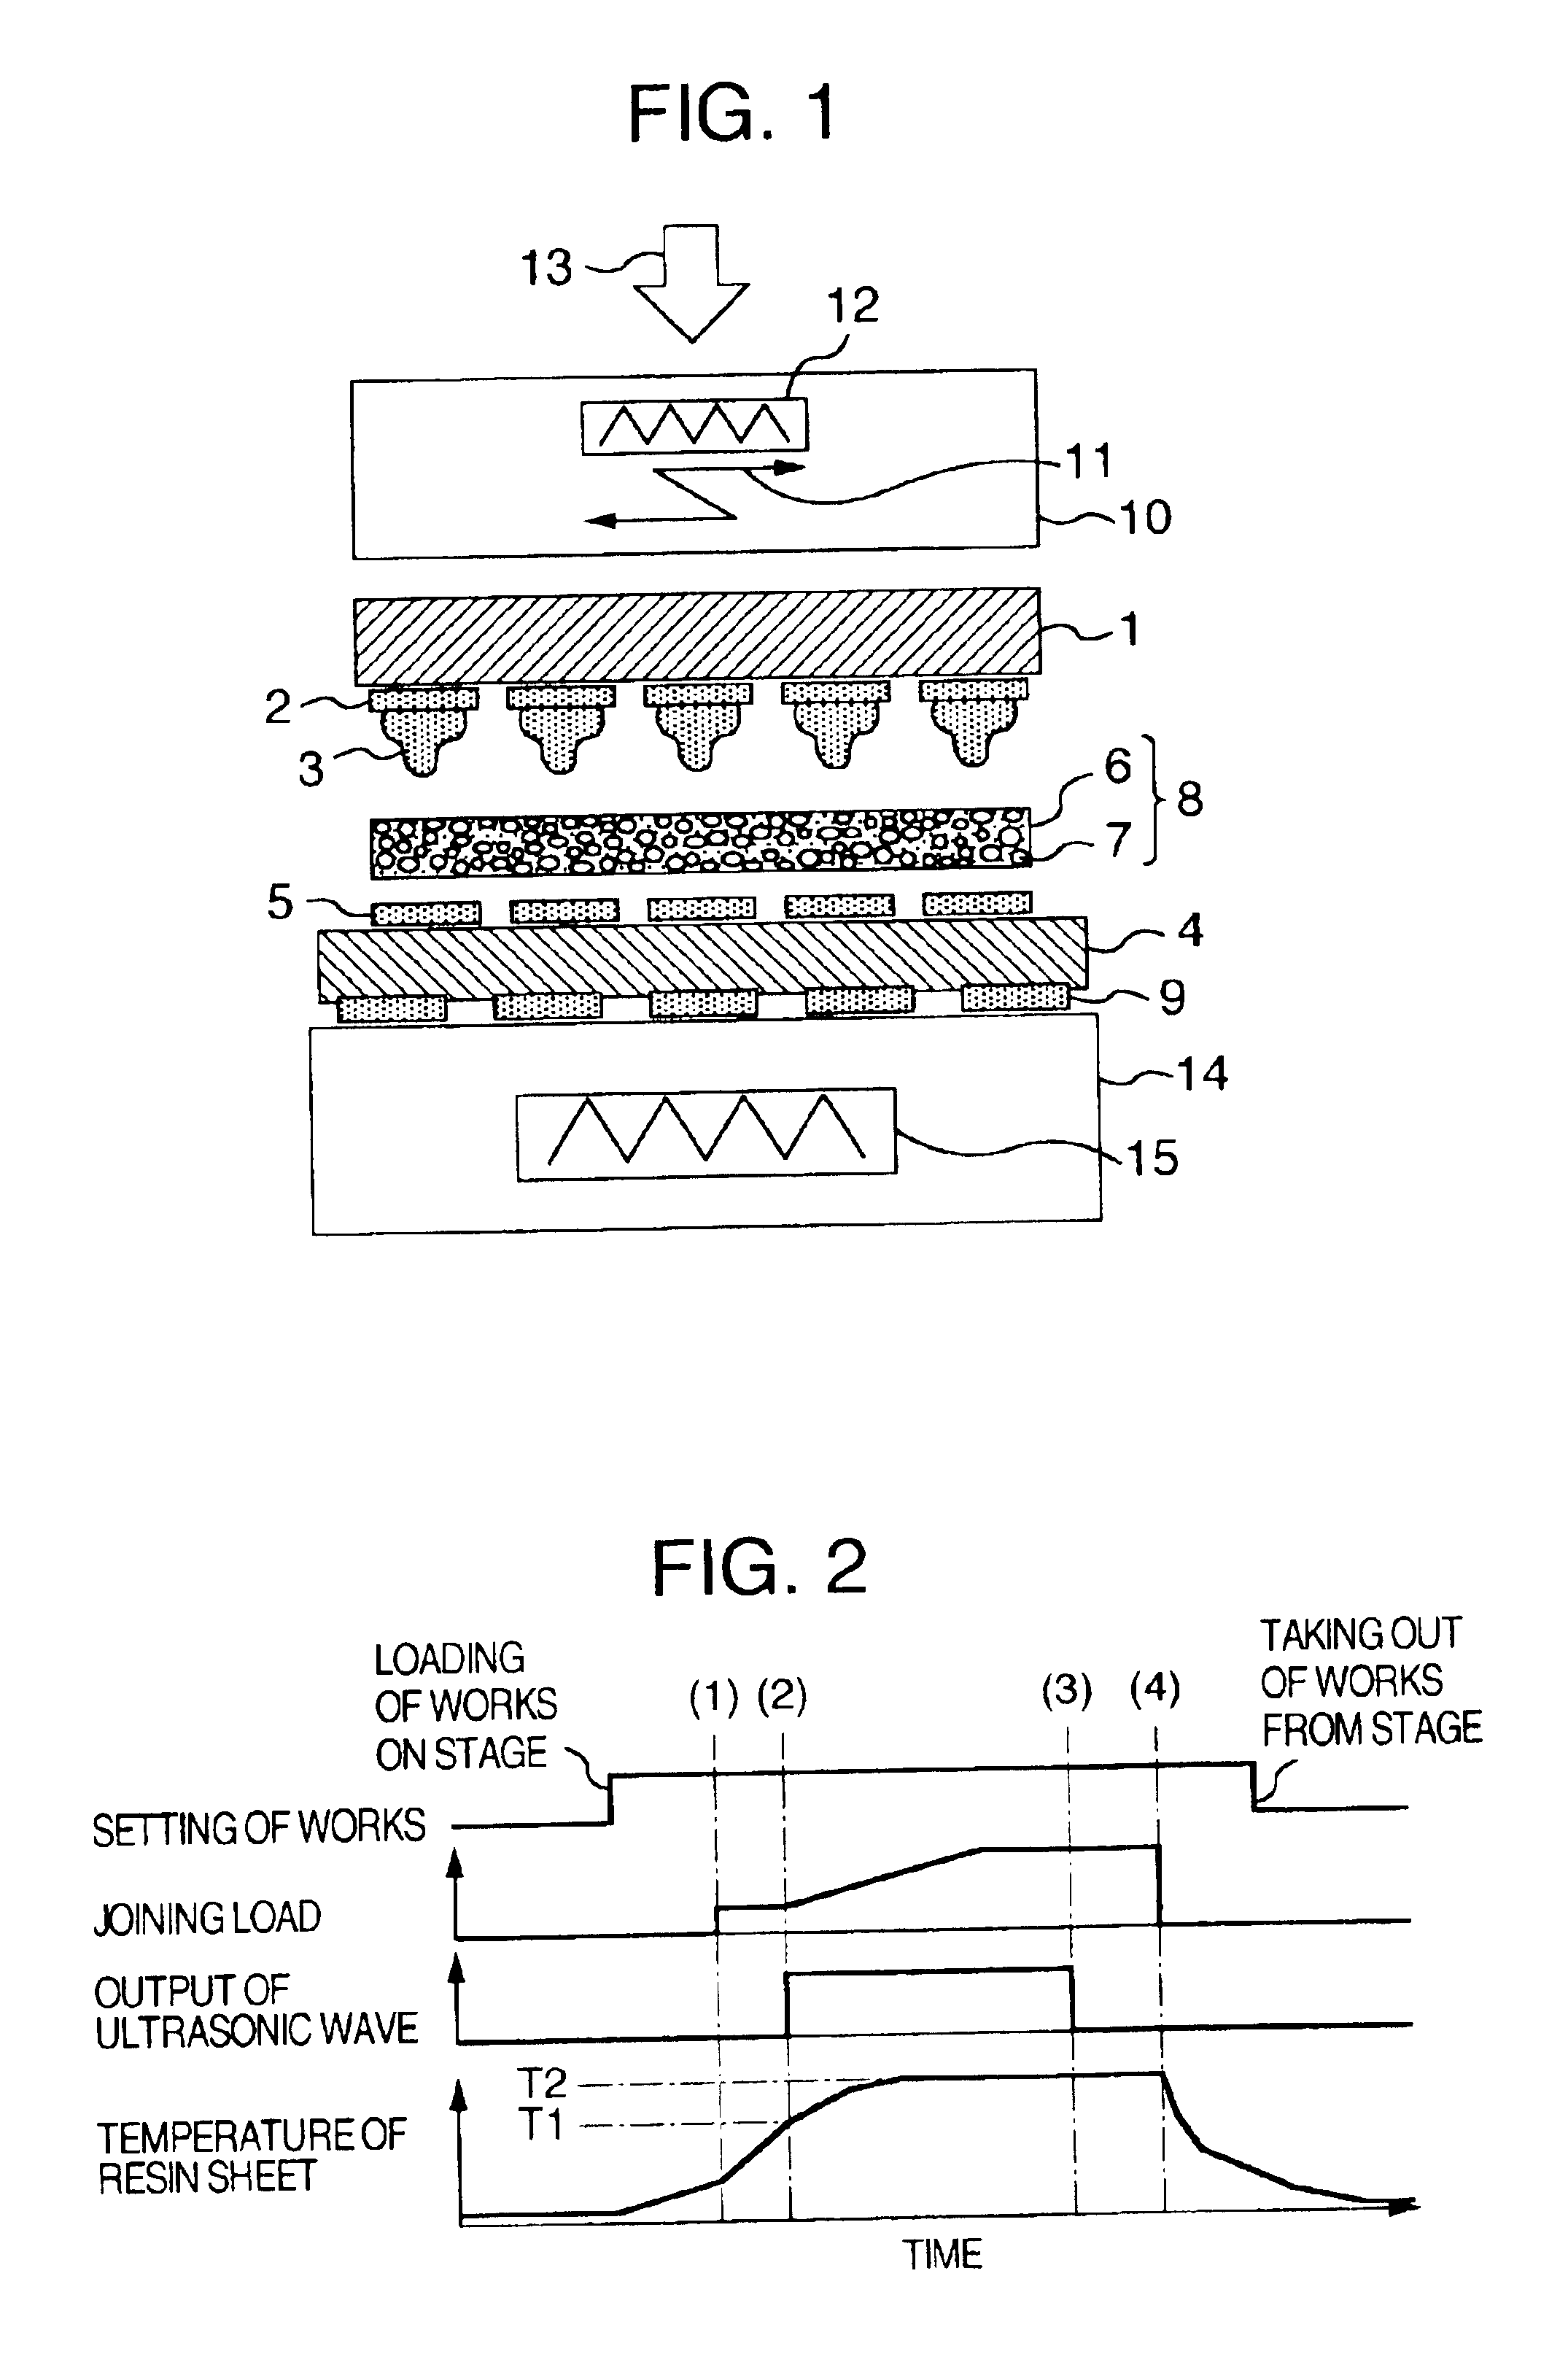 Flip chip assembly structure for semiconductor device and method of assembling therefor